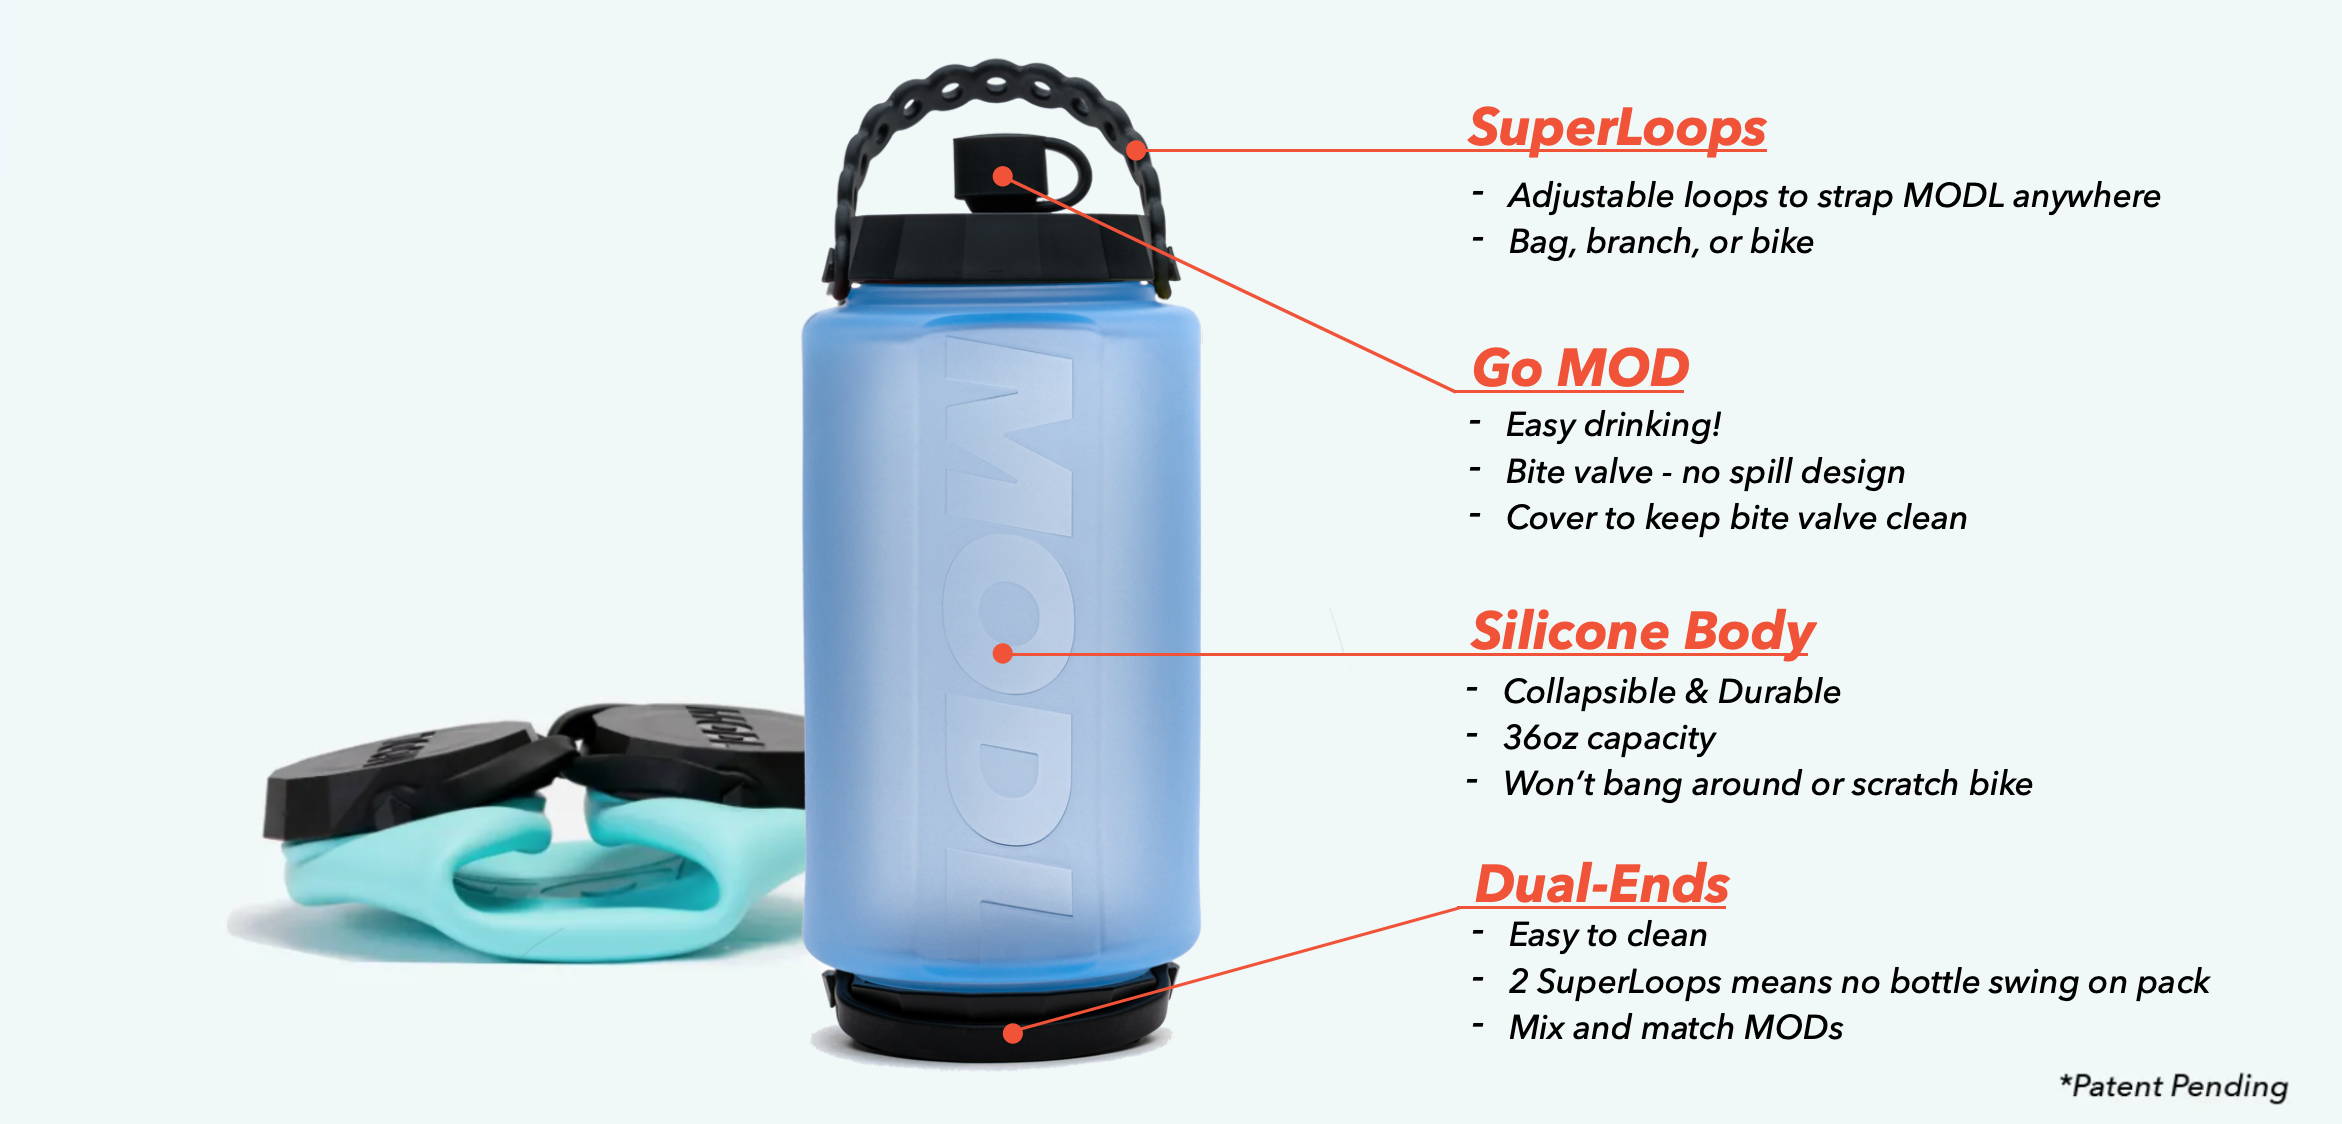 Diagram showing the benefits of MODL water bottle over traditional water bottles